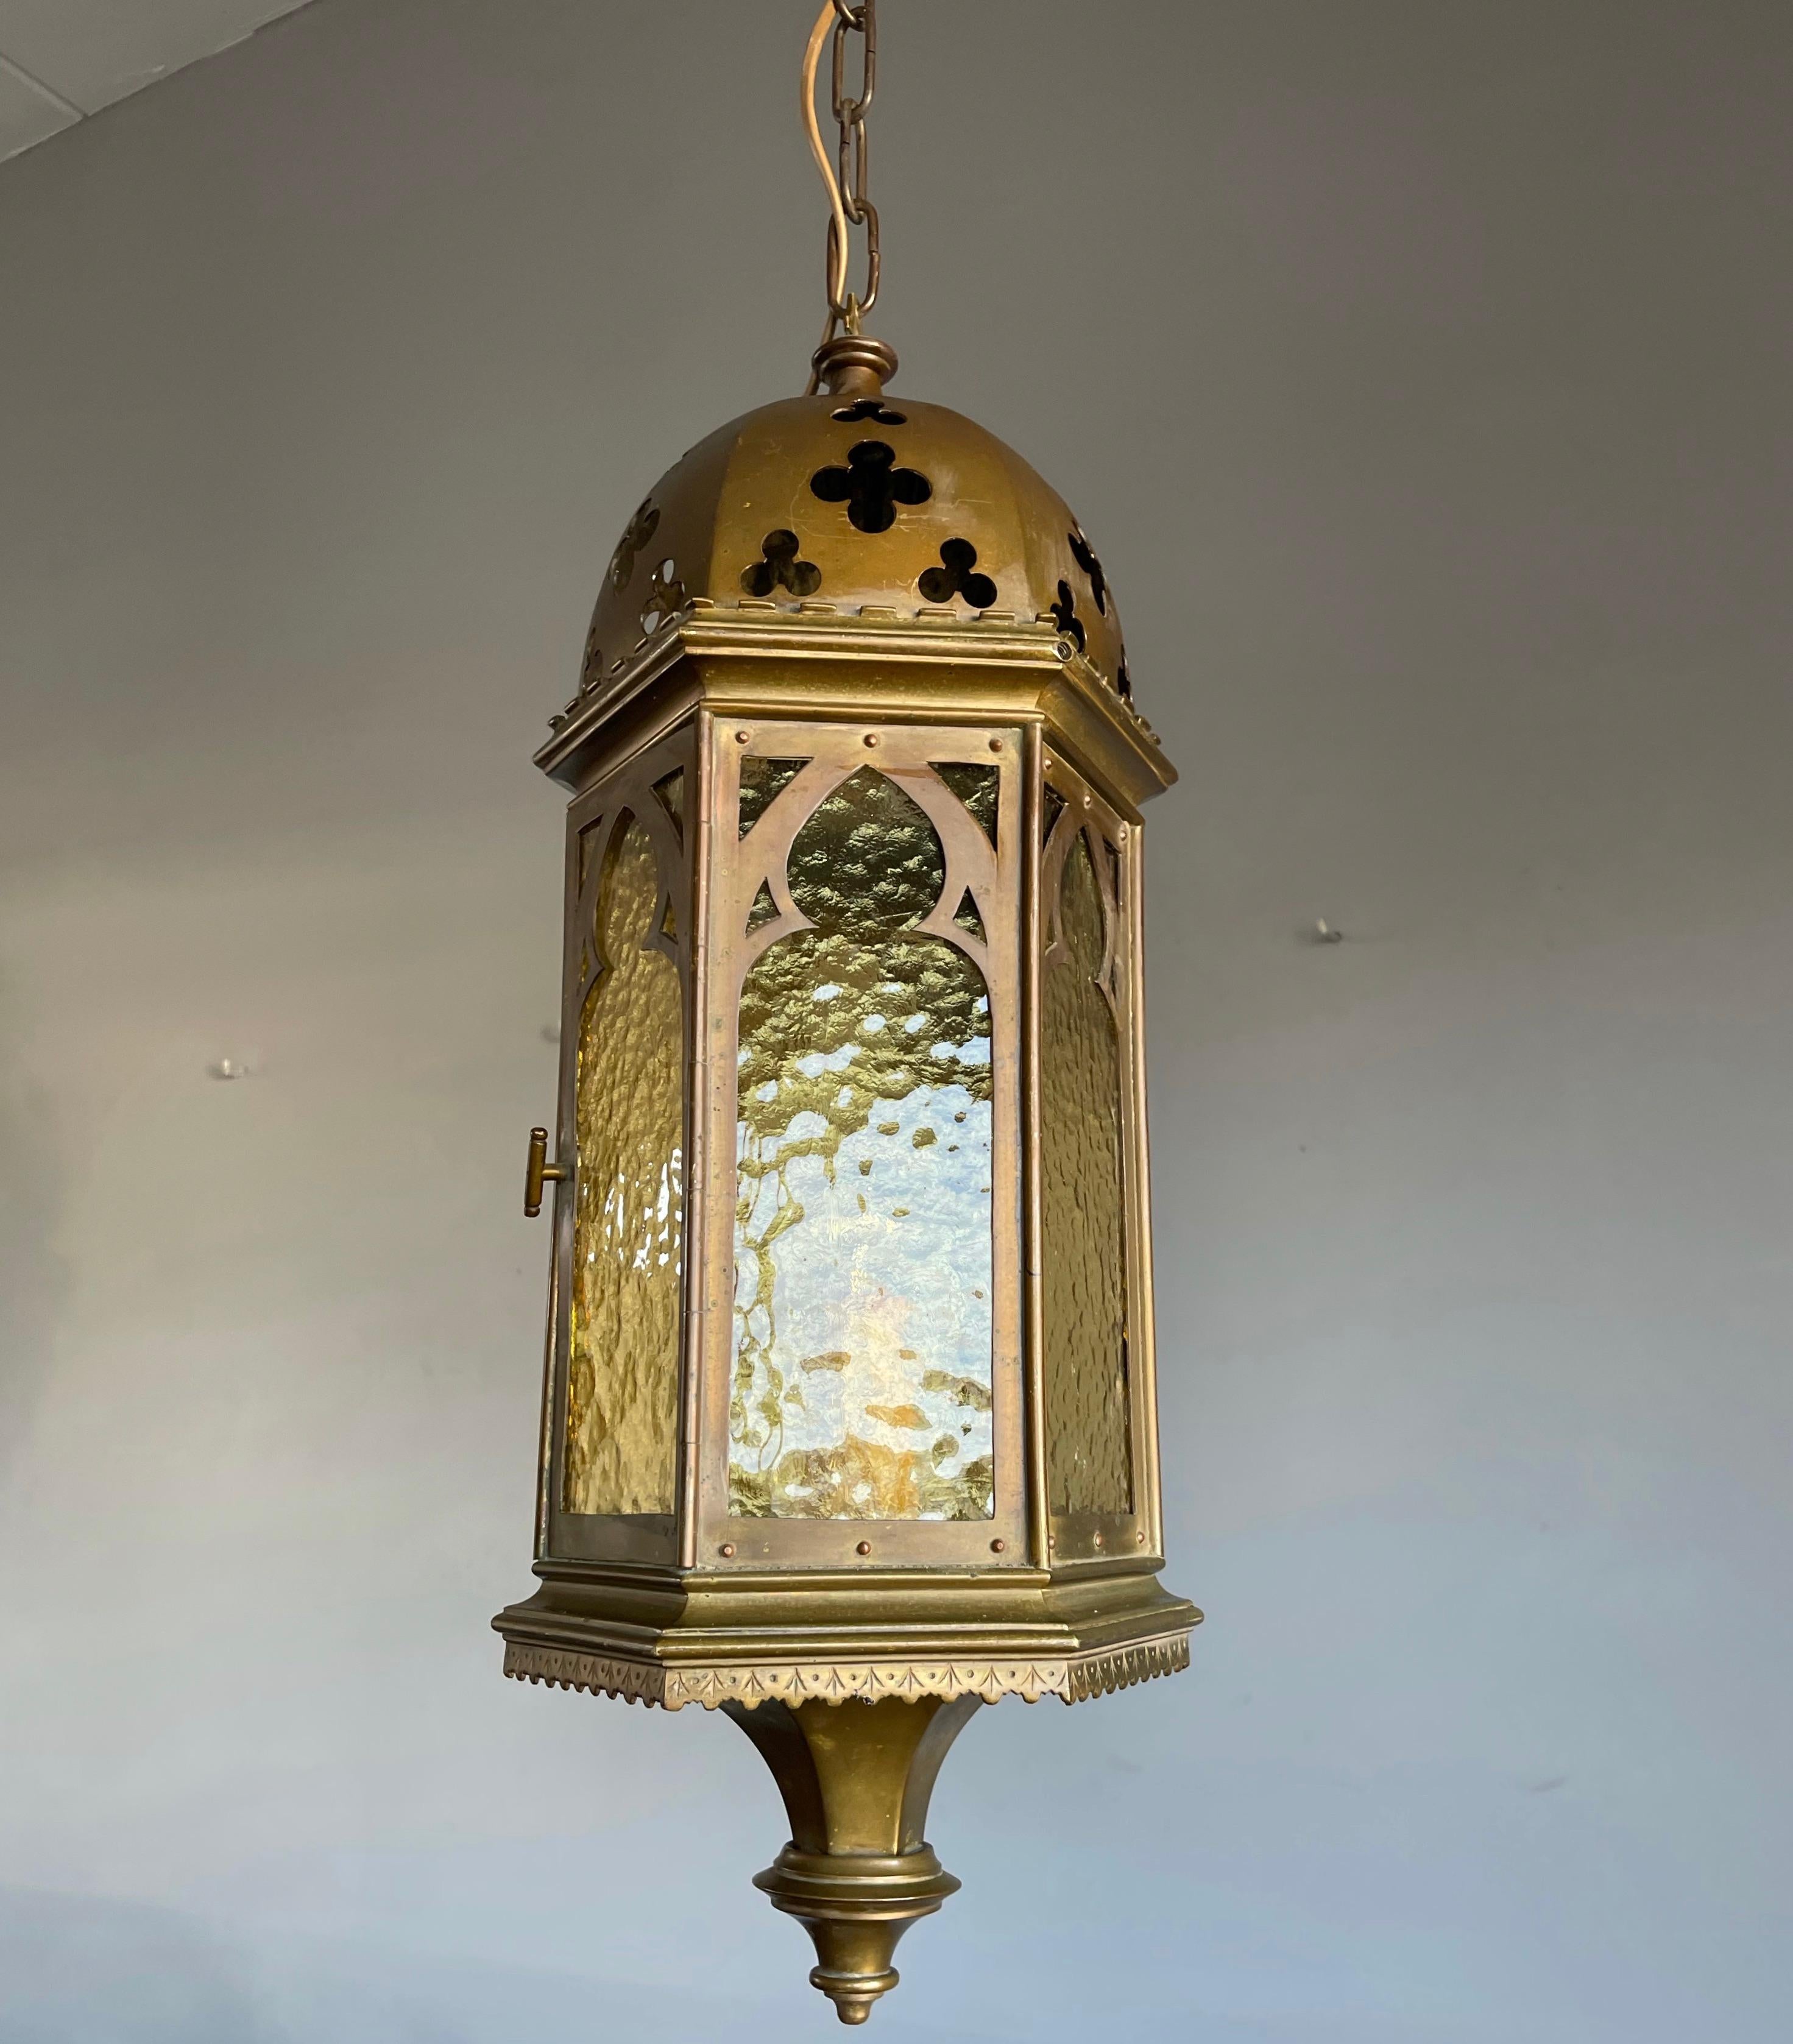 All handcrafted, hexagonal bronze and brass Gothic light fixture.

If you are a collector of rare and ancient looking Gothic antiques then this good size and one of a kind pendant could be flying your way soon. With antique light fixtures as one of